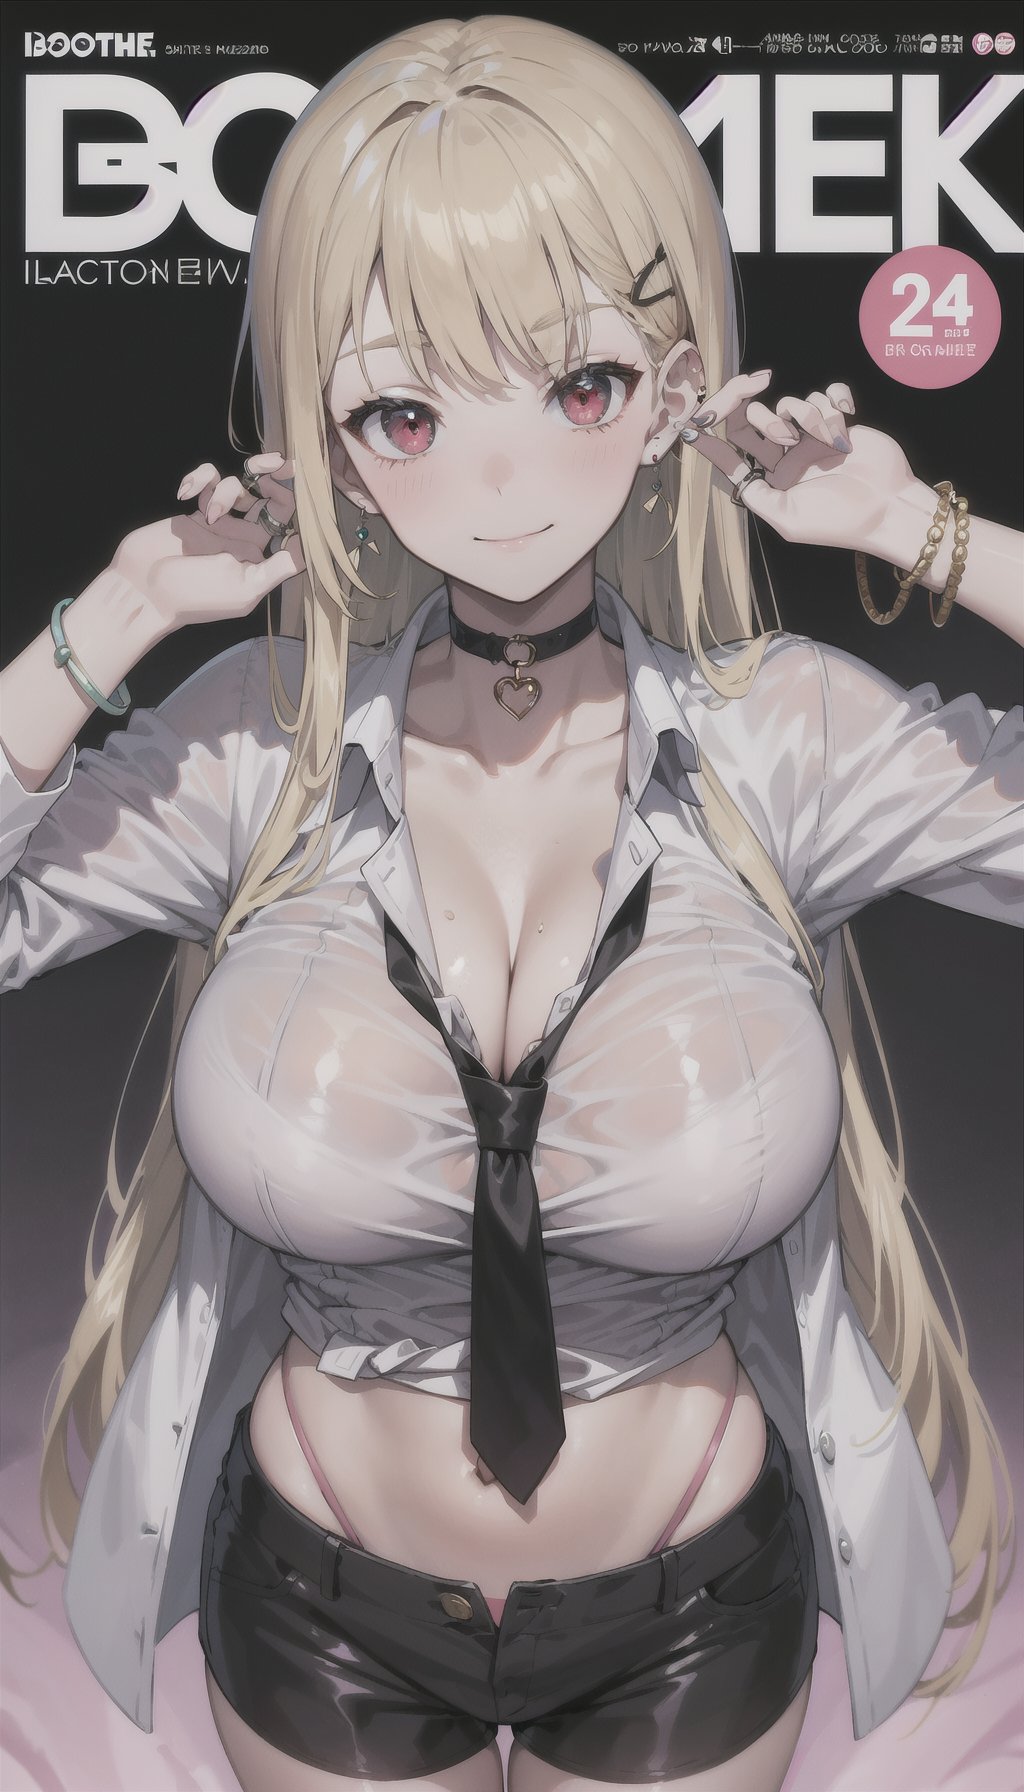 masterpiece, best quality, full body, 1girl, bangs, black choker, black necktie, blonde hair,, blush, bracelet, Choker, collarbone, collared shirt, cowboy shot, unbuttoned dress shirt, ear piercing, eyebrows visible through hair, gradient hair, confident (not smiling), gyaru, jewelry, kogal, long hair, looking at viewer, loose necktie,, piercing, red eyes, ring, unbuttonedshirt, smile, solo, midriff, black panties, boob window, cleavage, Bedroom,,illustration, no pants(magazine:1.3), (cover-style:1.3), fashionable, woman, vibrant, outfit, posing, front, colorful, dynamic, background, elements, confident, expression, holding, statement, accessory, majestic, coiled, around, touch, scene, text, cover, bold, attention-grabbing, title, stylish, font, catchy, headline, larger, striking, modern, trendy, focus, fashion,